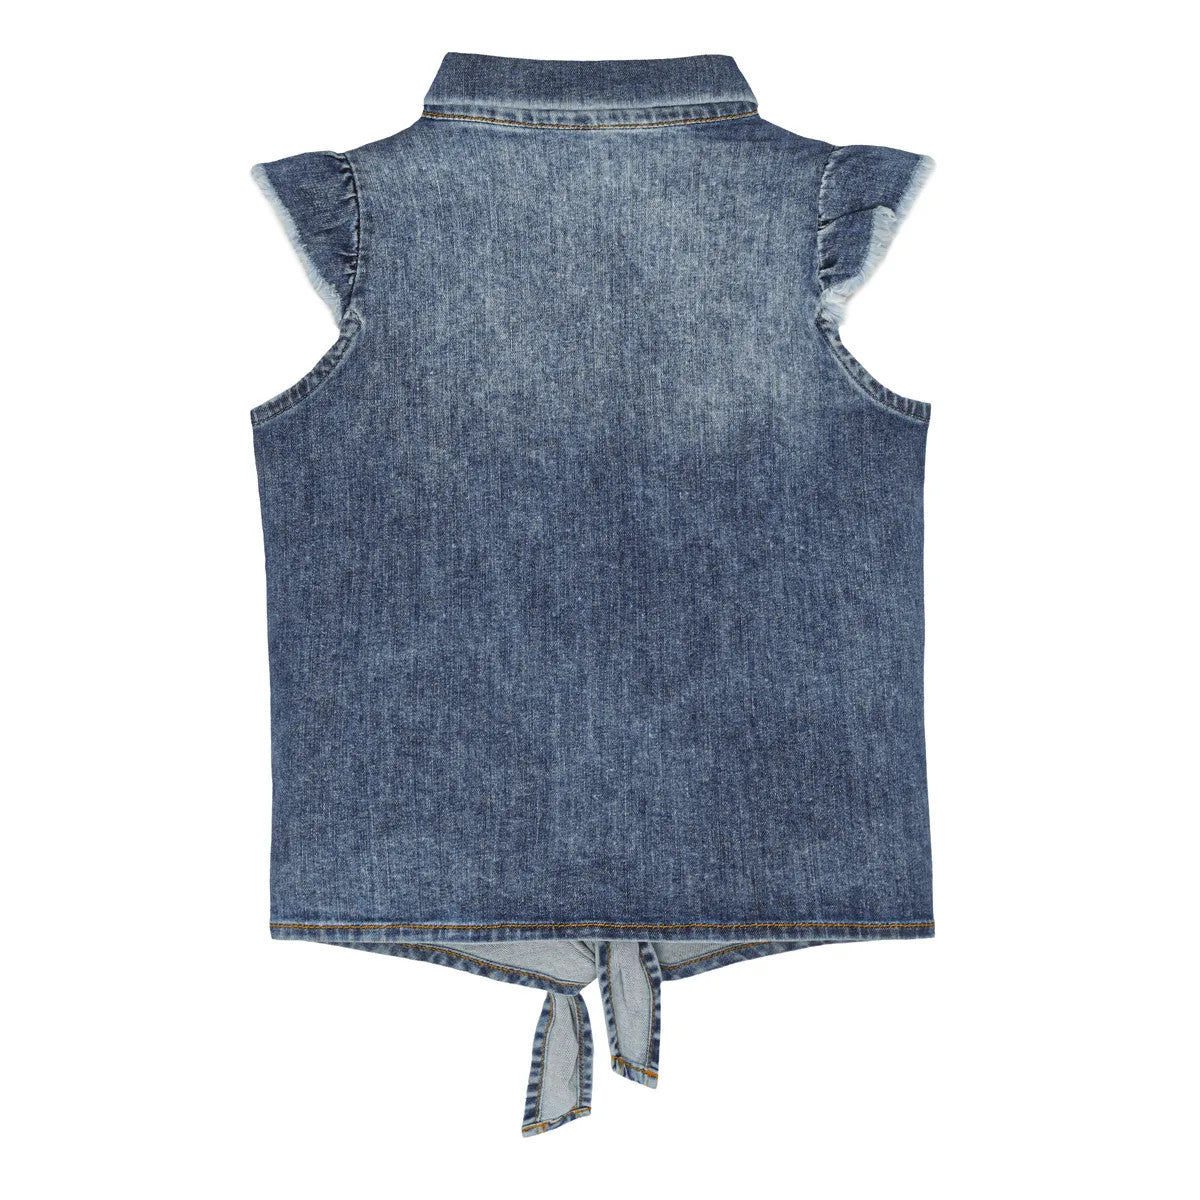 Little Hedonist denim with bleached stains knotted sleeveless shirt with bleached stains. Sustainable kids fashion made from our best organic cotton denim. Superfashion for girls!